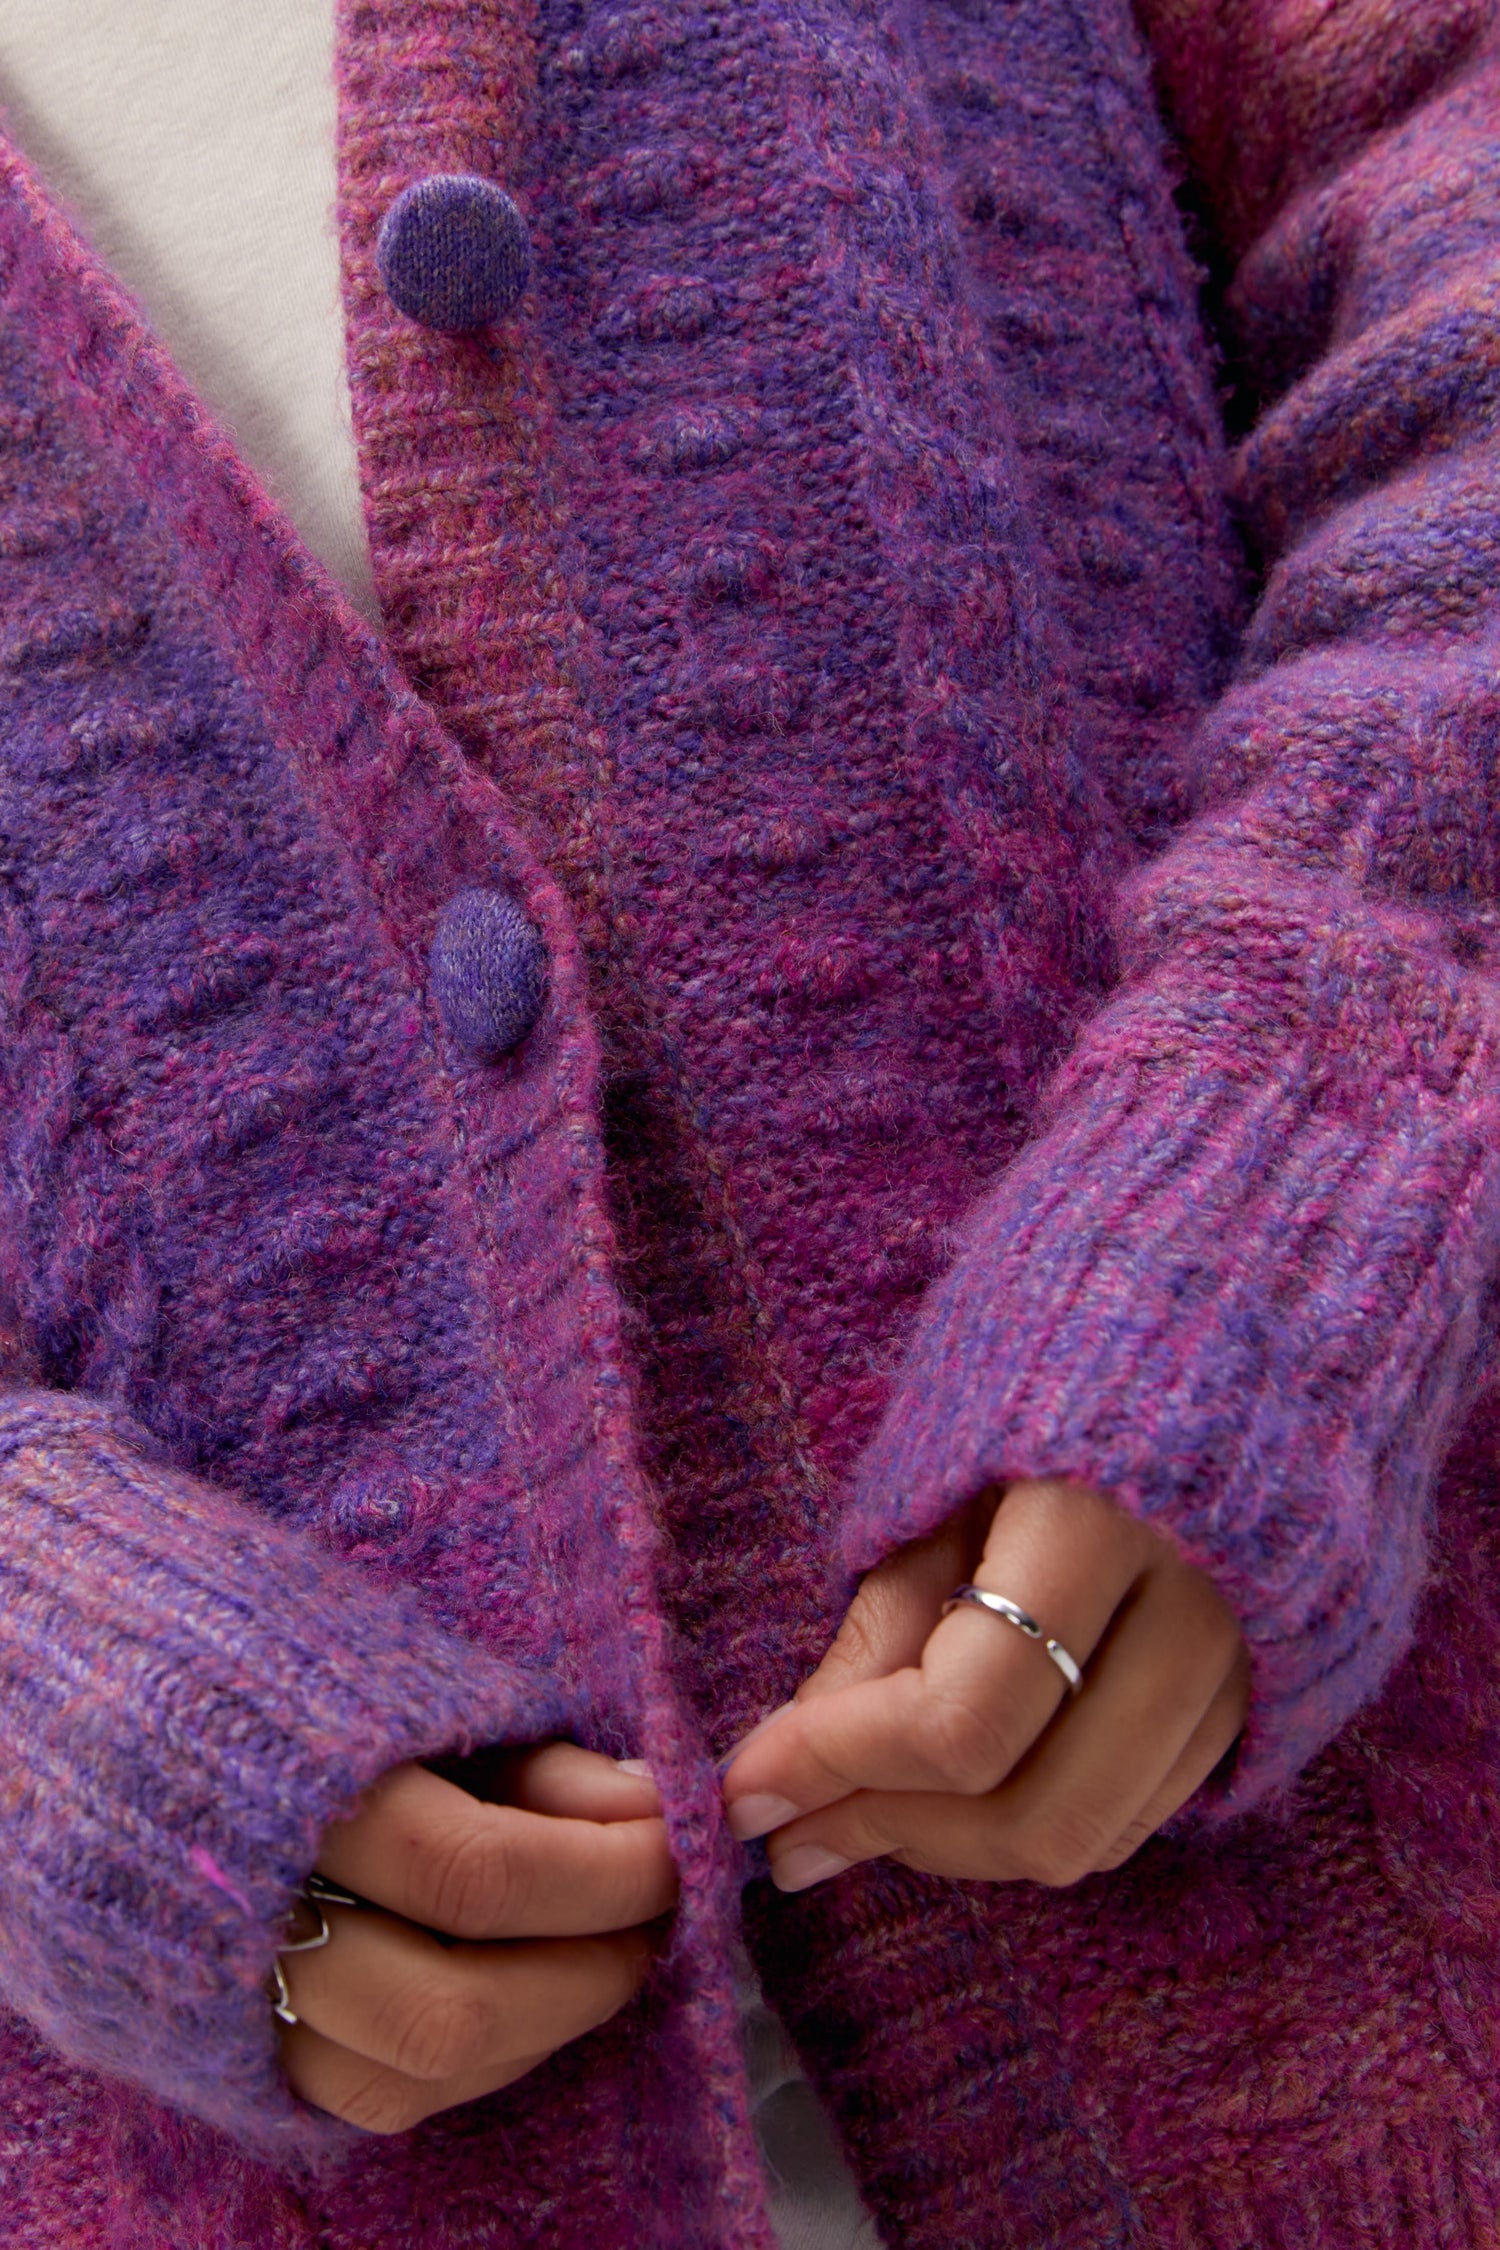 A curly-haired model featuring an ombre cardigan in Wild Orchid.